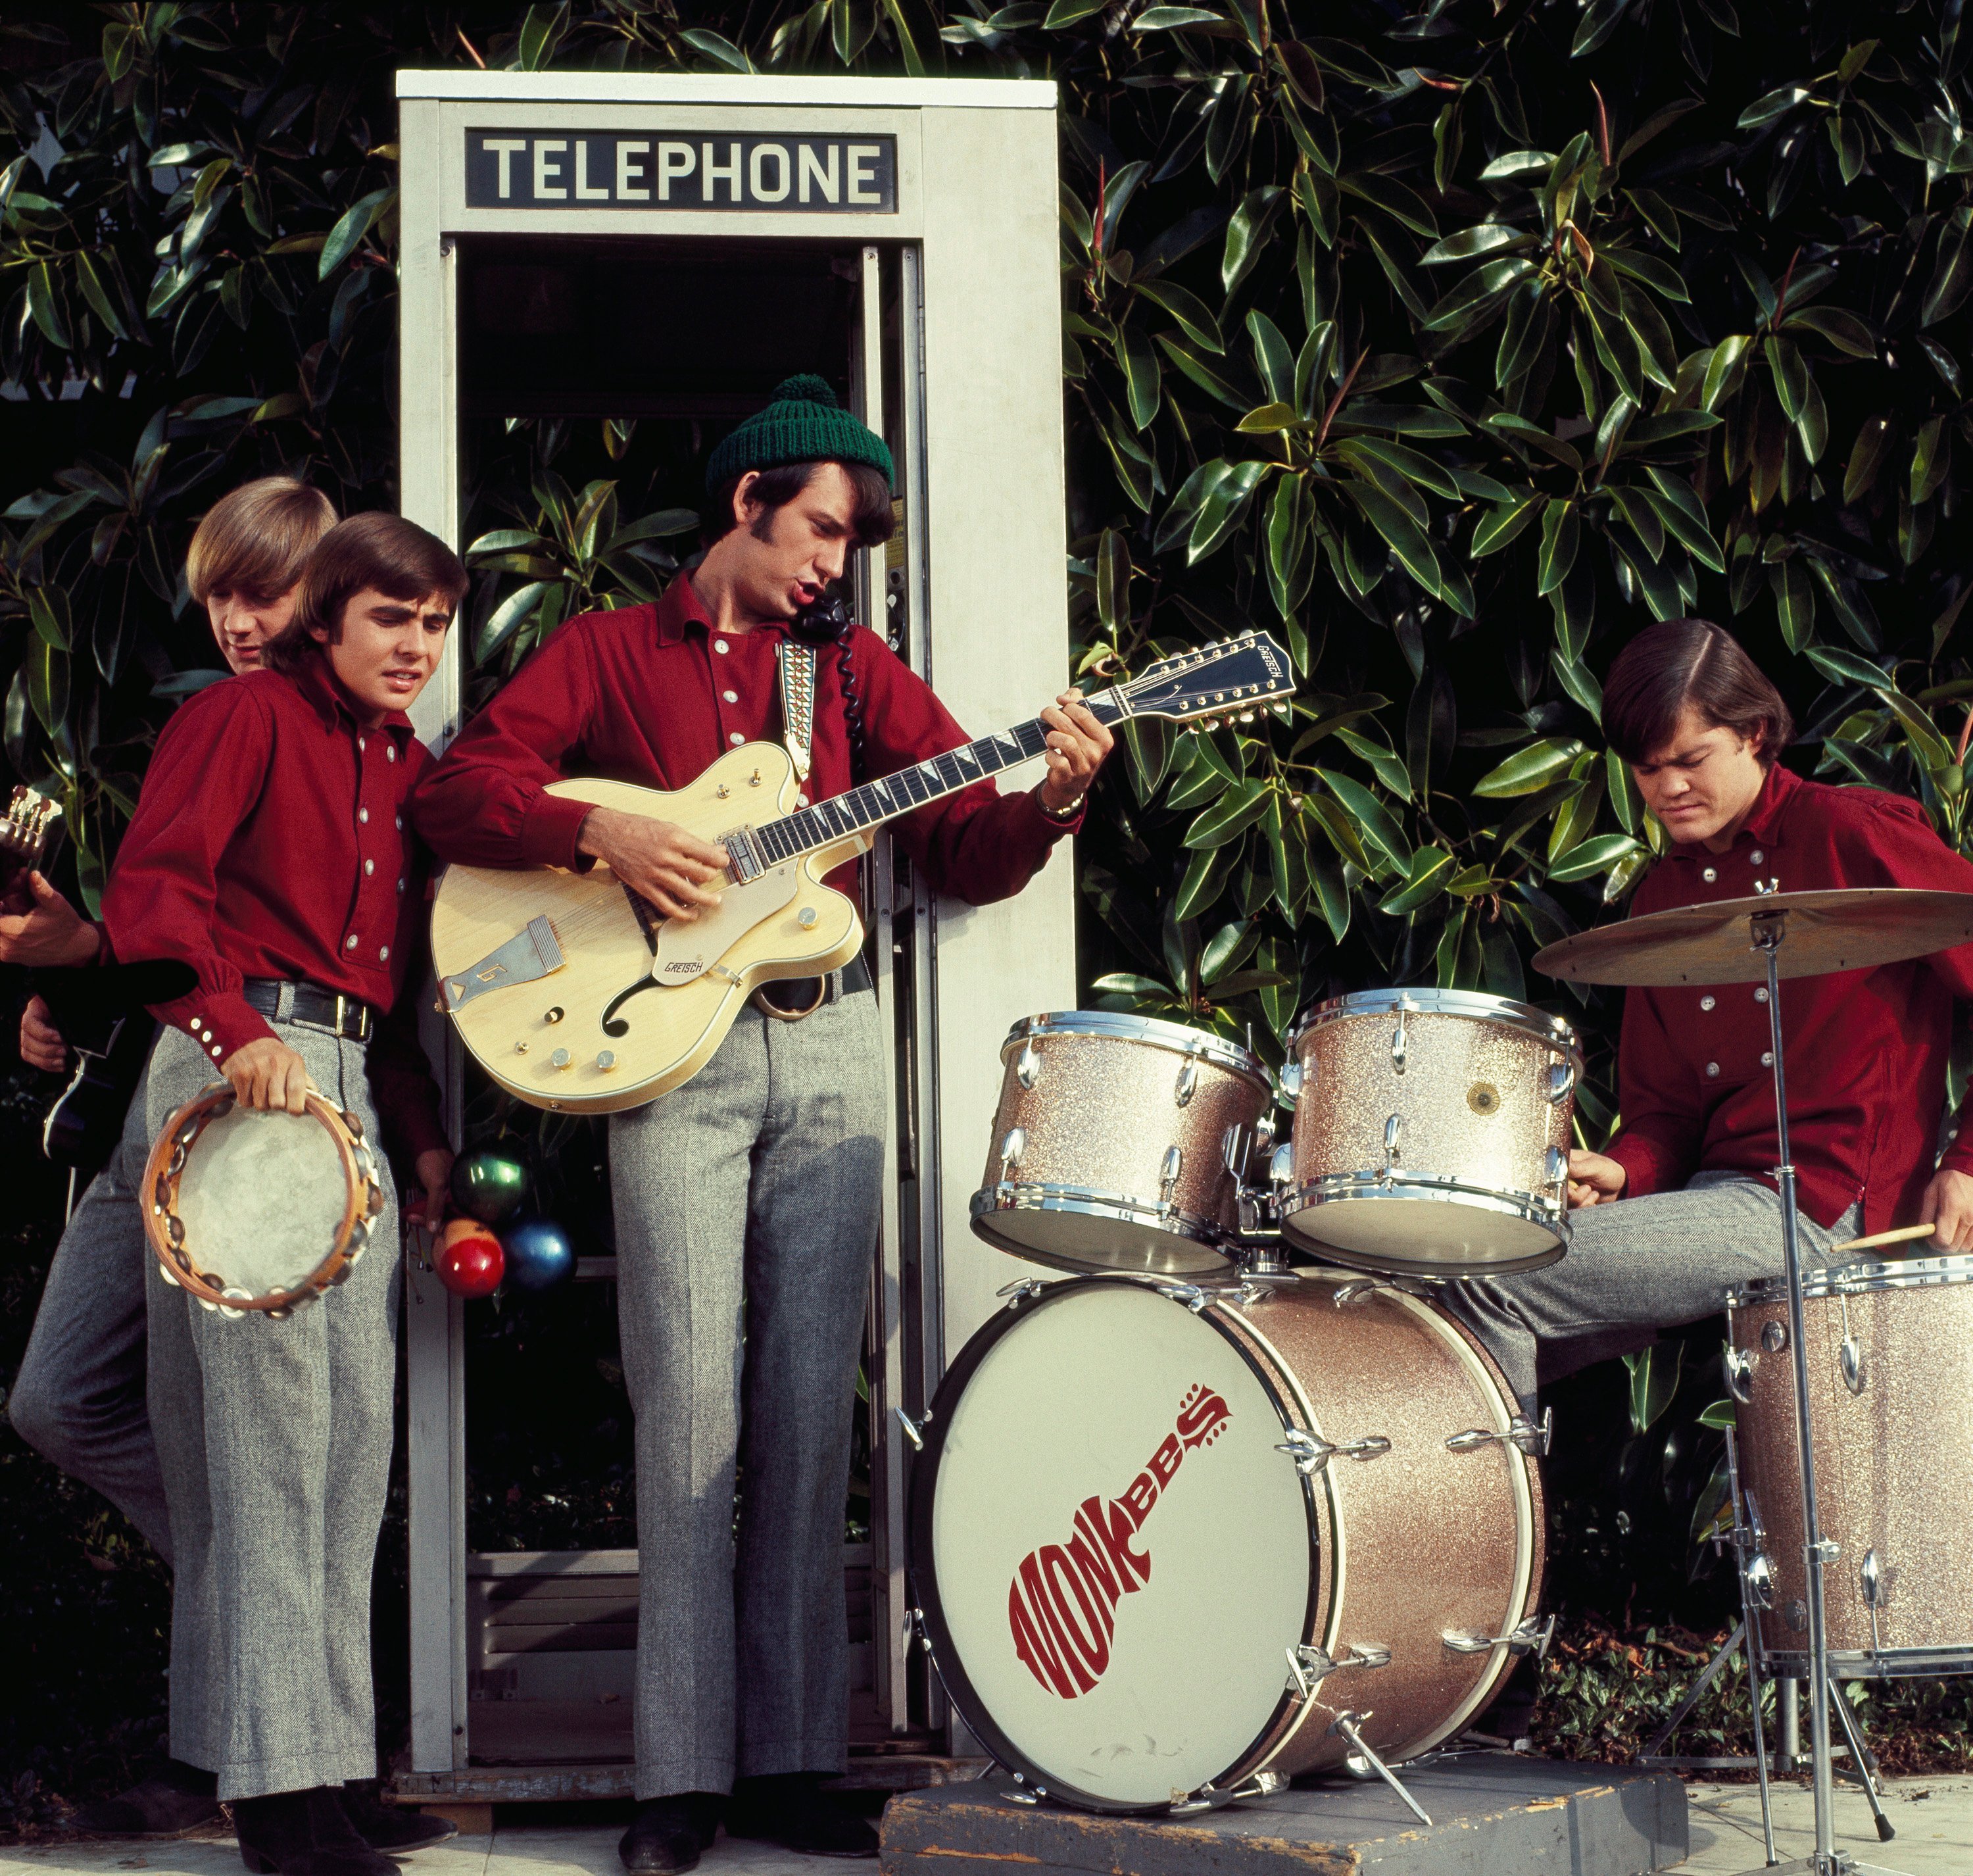 The Monkees' Peter Tork, Davy Jones, Mike Nesmith, and Micky Dolenz near plants